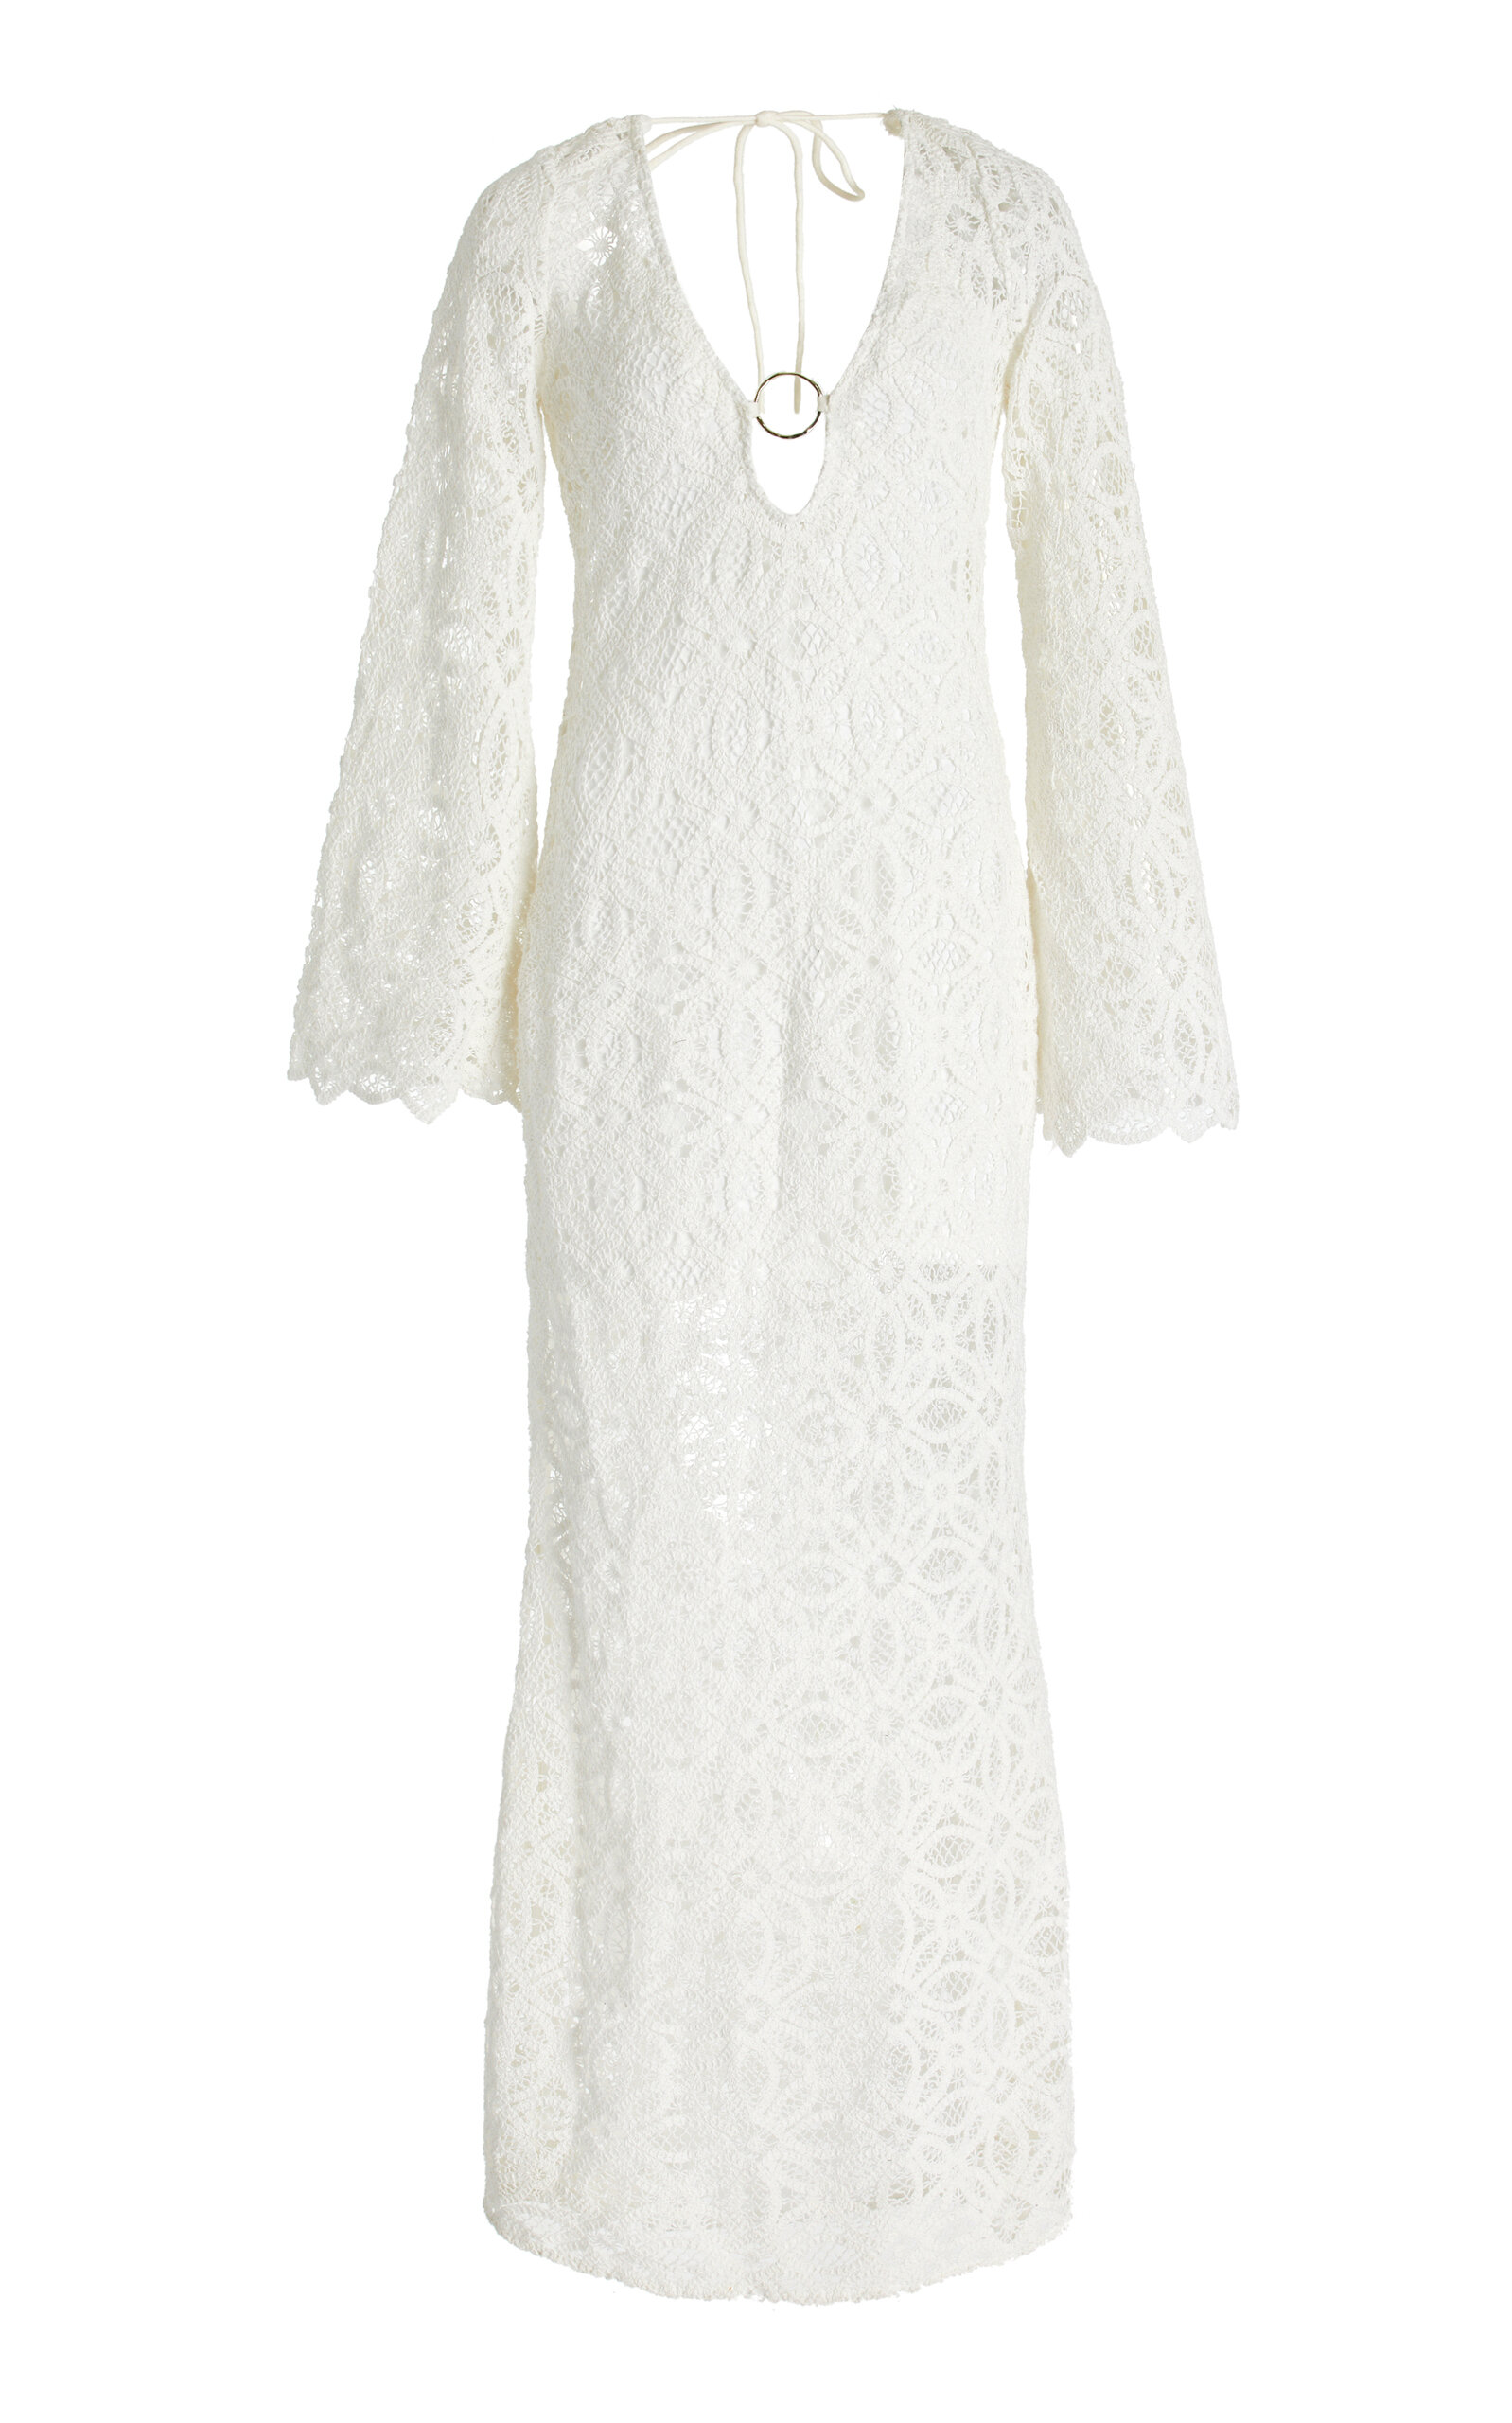 SIGNIFICANT OTHER IMOGEN COTTON LACE MAXI DRESS